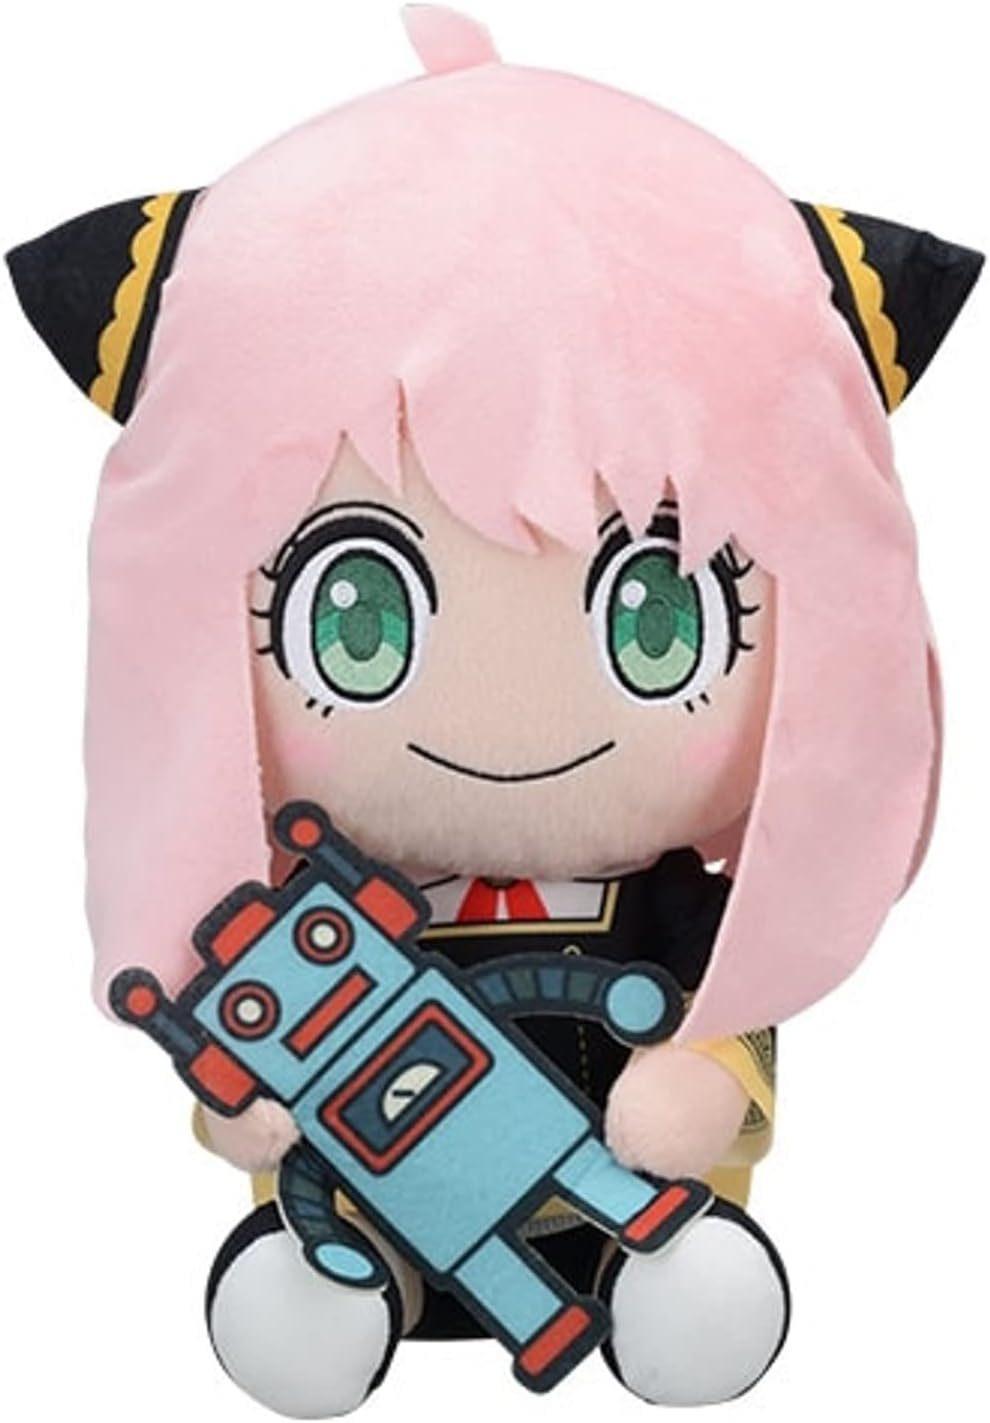 Spy x Family: Anya Forger with Robot - Plush